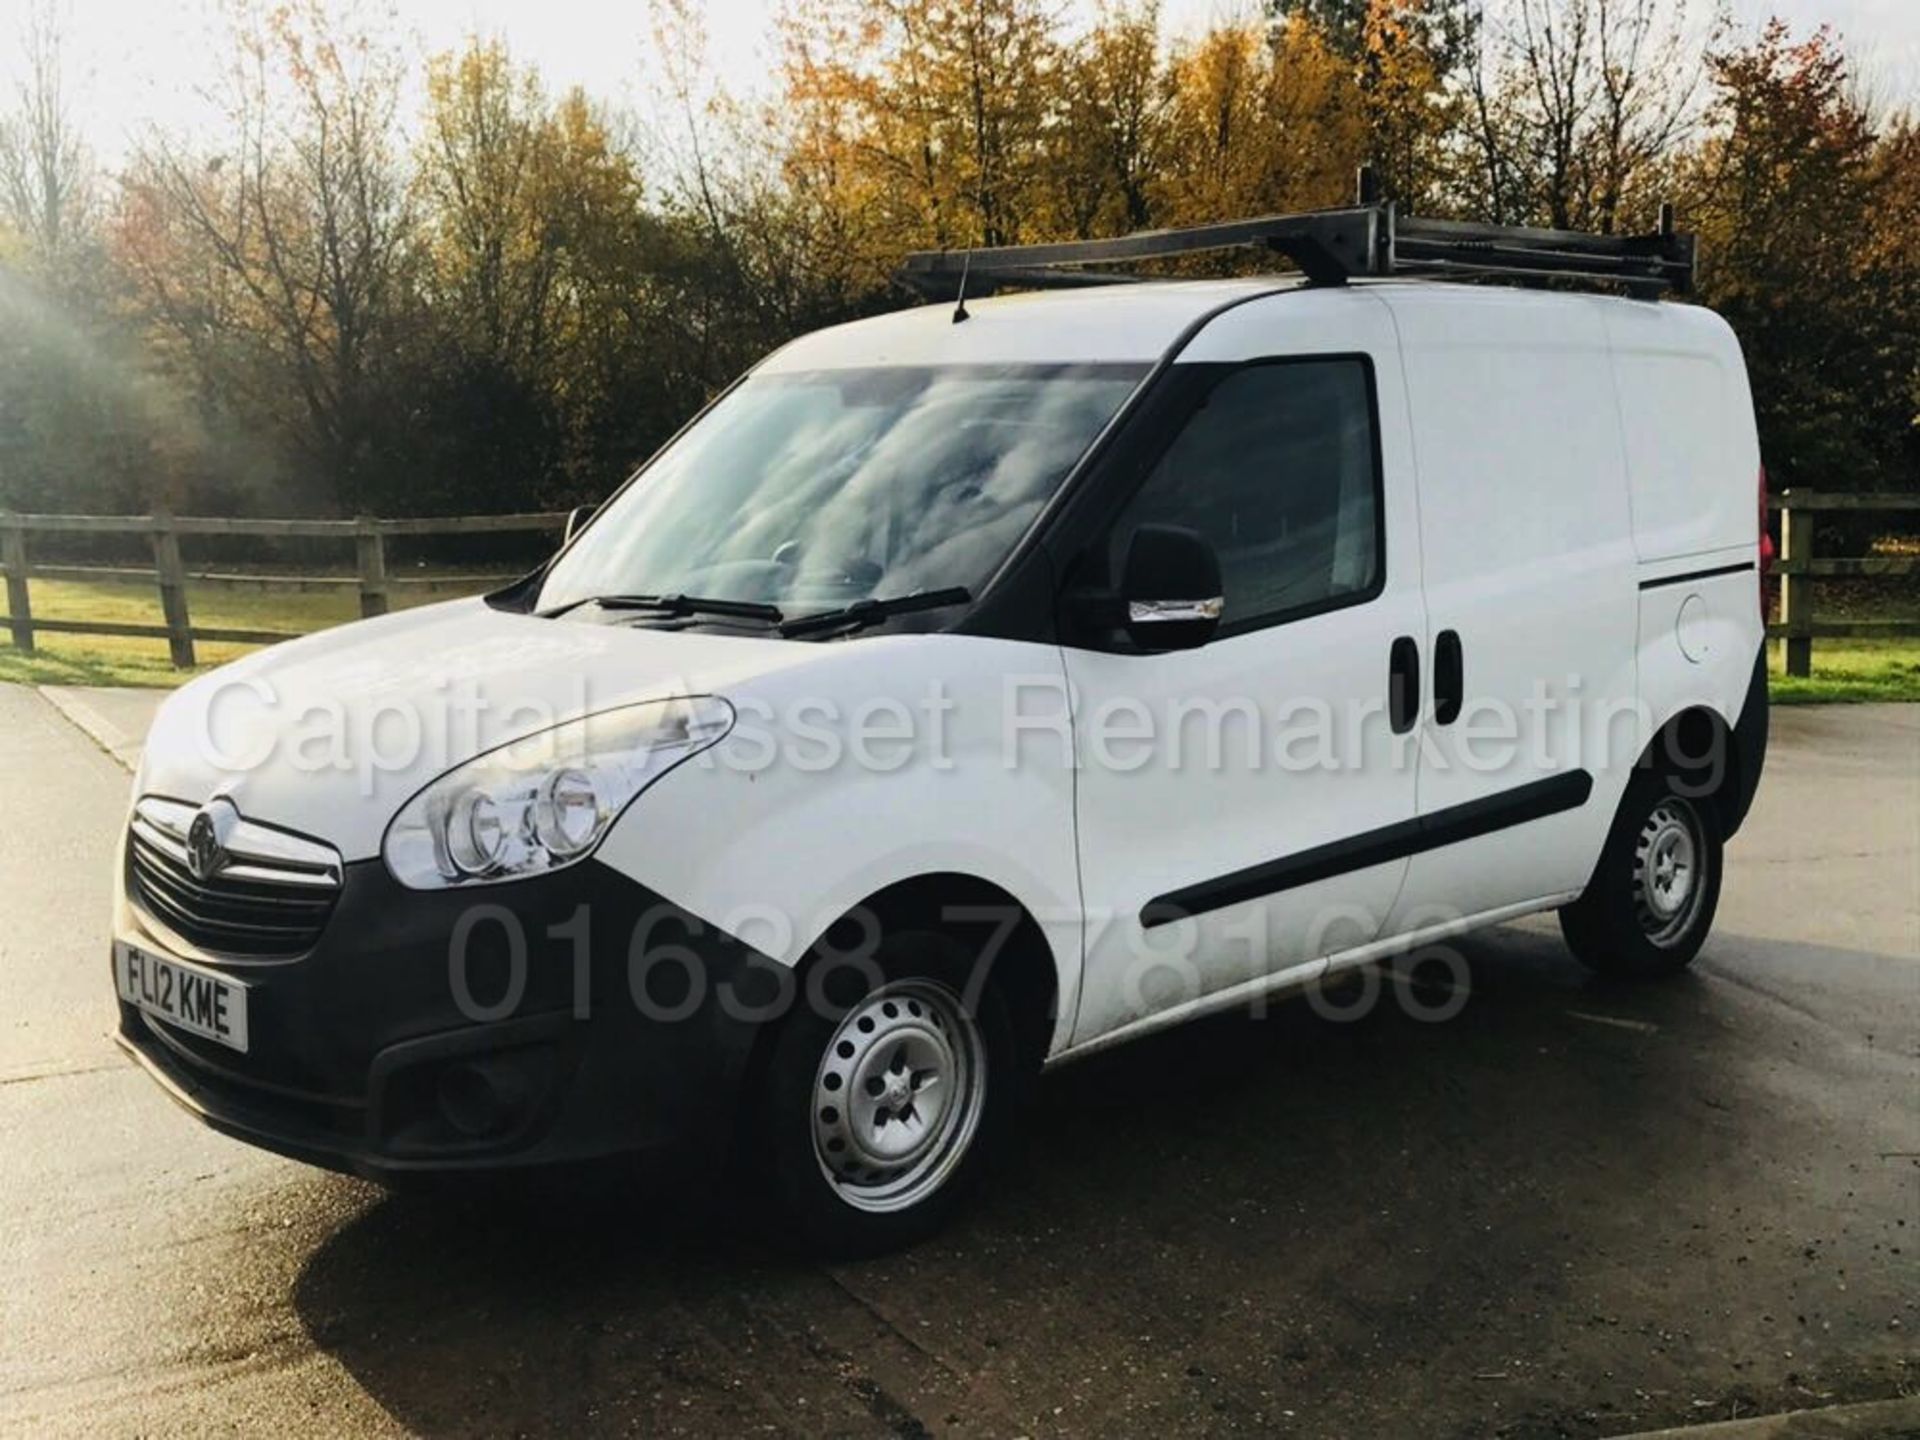 VAUXHALL COMBO 2000 L1H1 (2012 - NEW MODEL) '1.6 CDTI - 105 BHP - STOP / START' (1 OWNER FROM NEW)